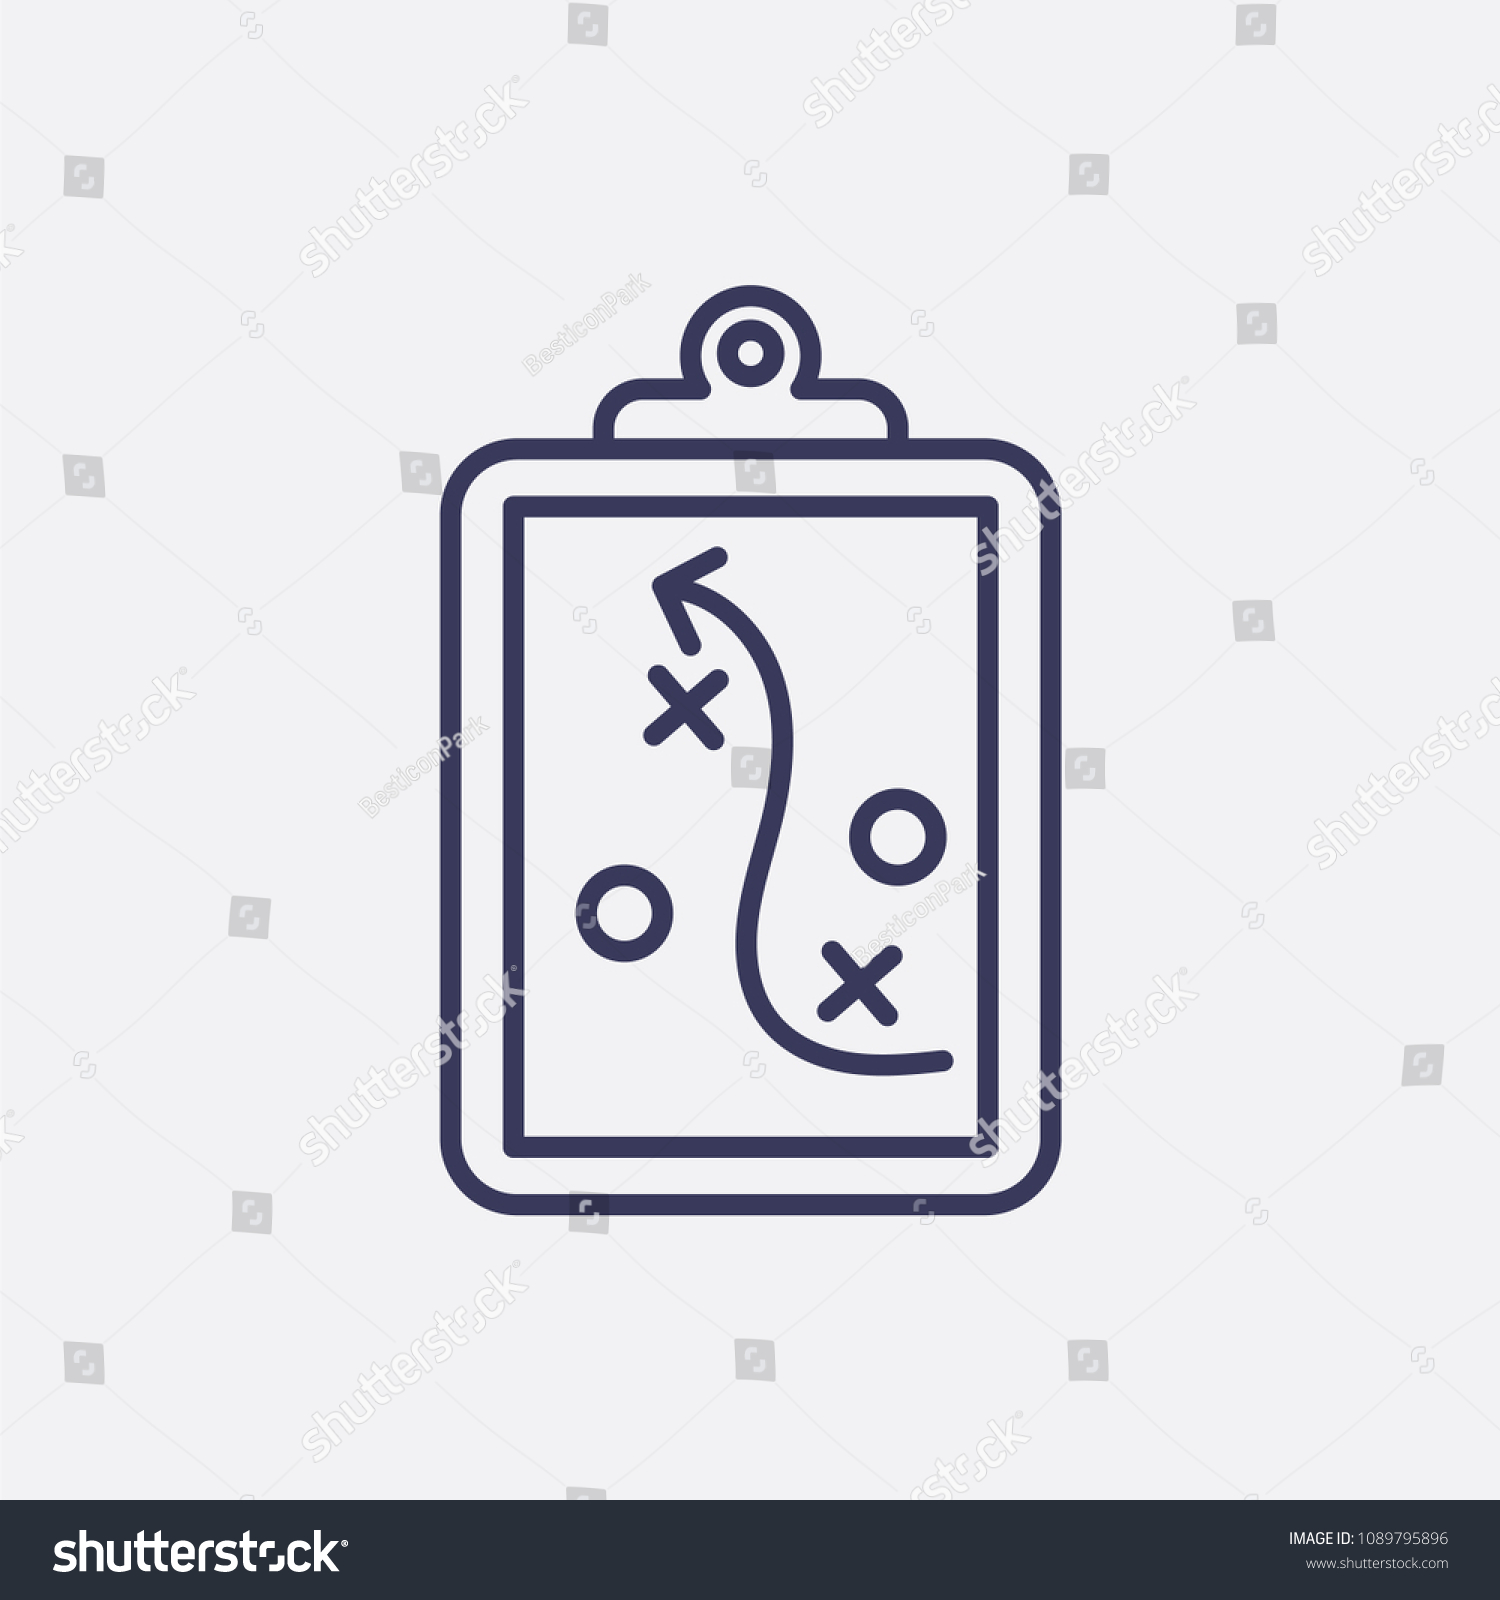 Outline clipboard icon illustration,vector tactick sign,plan symbol #1089795896